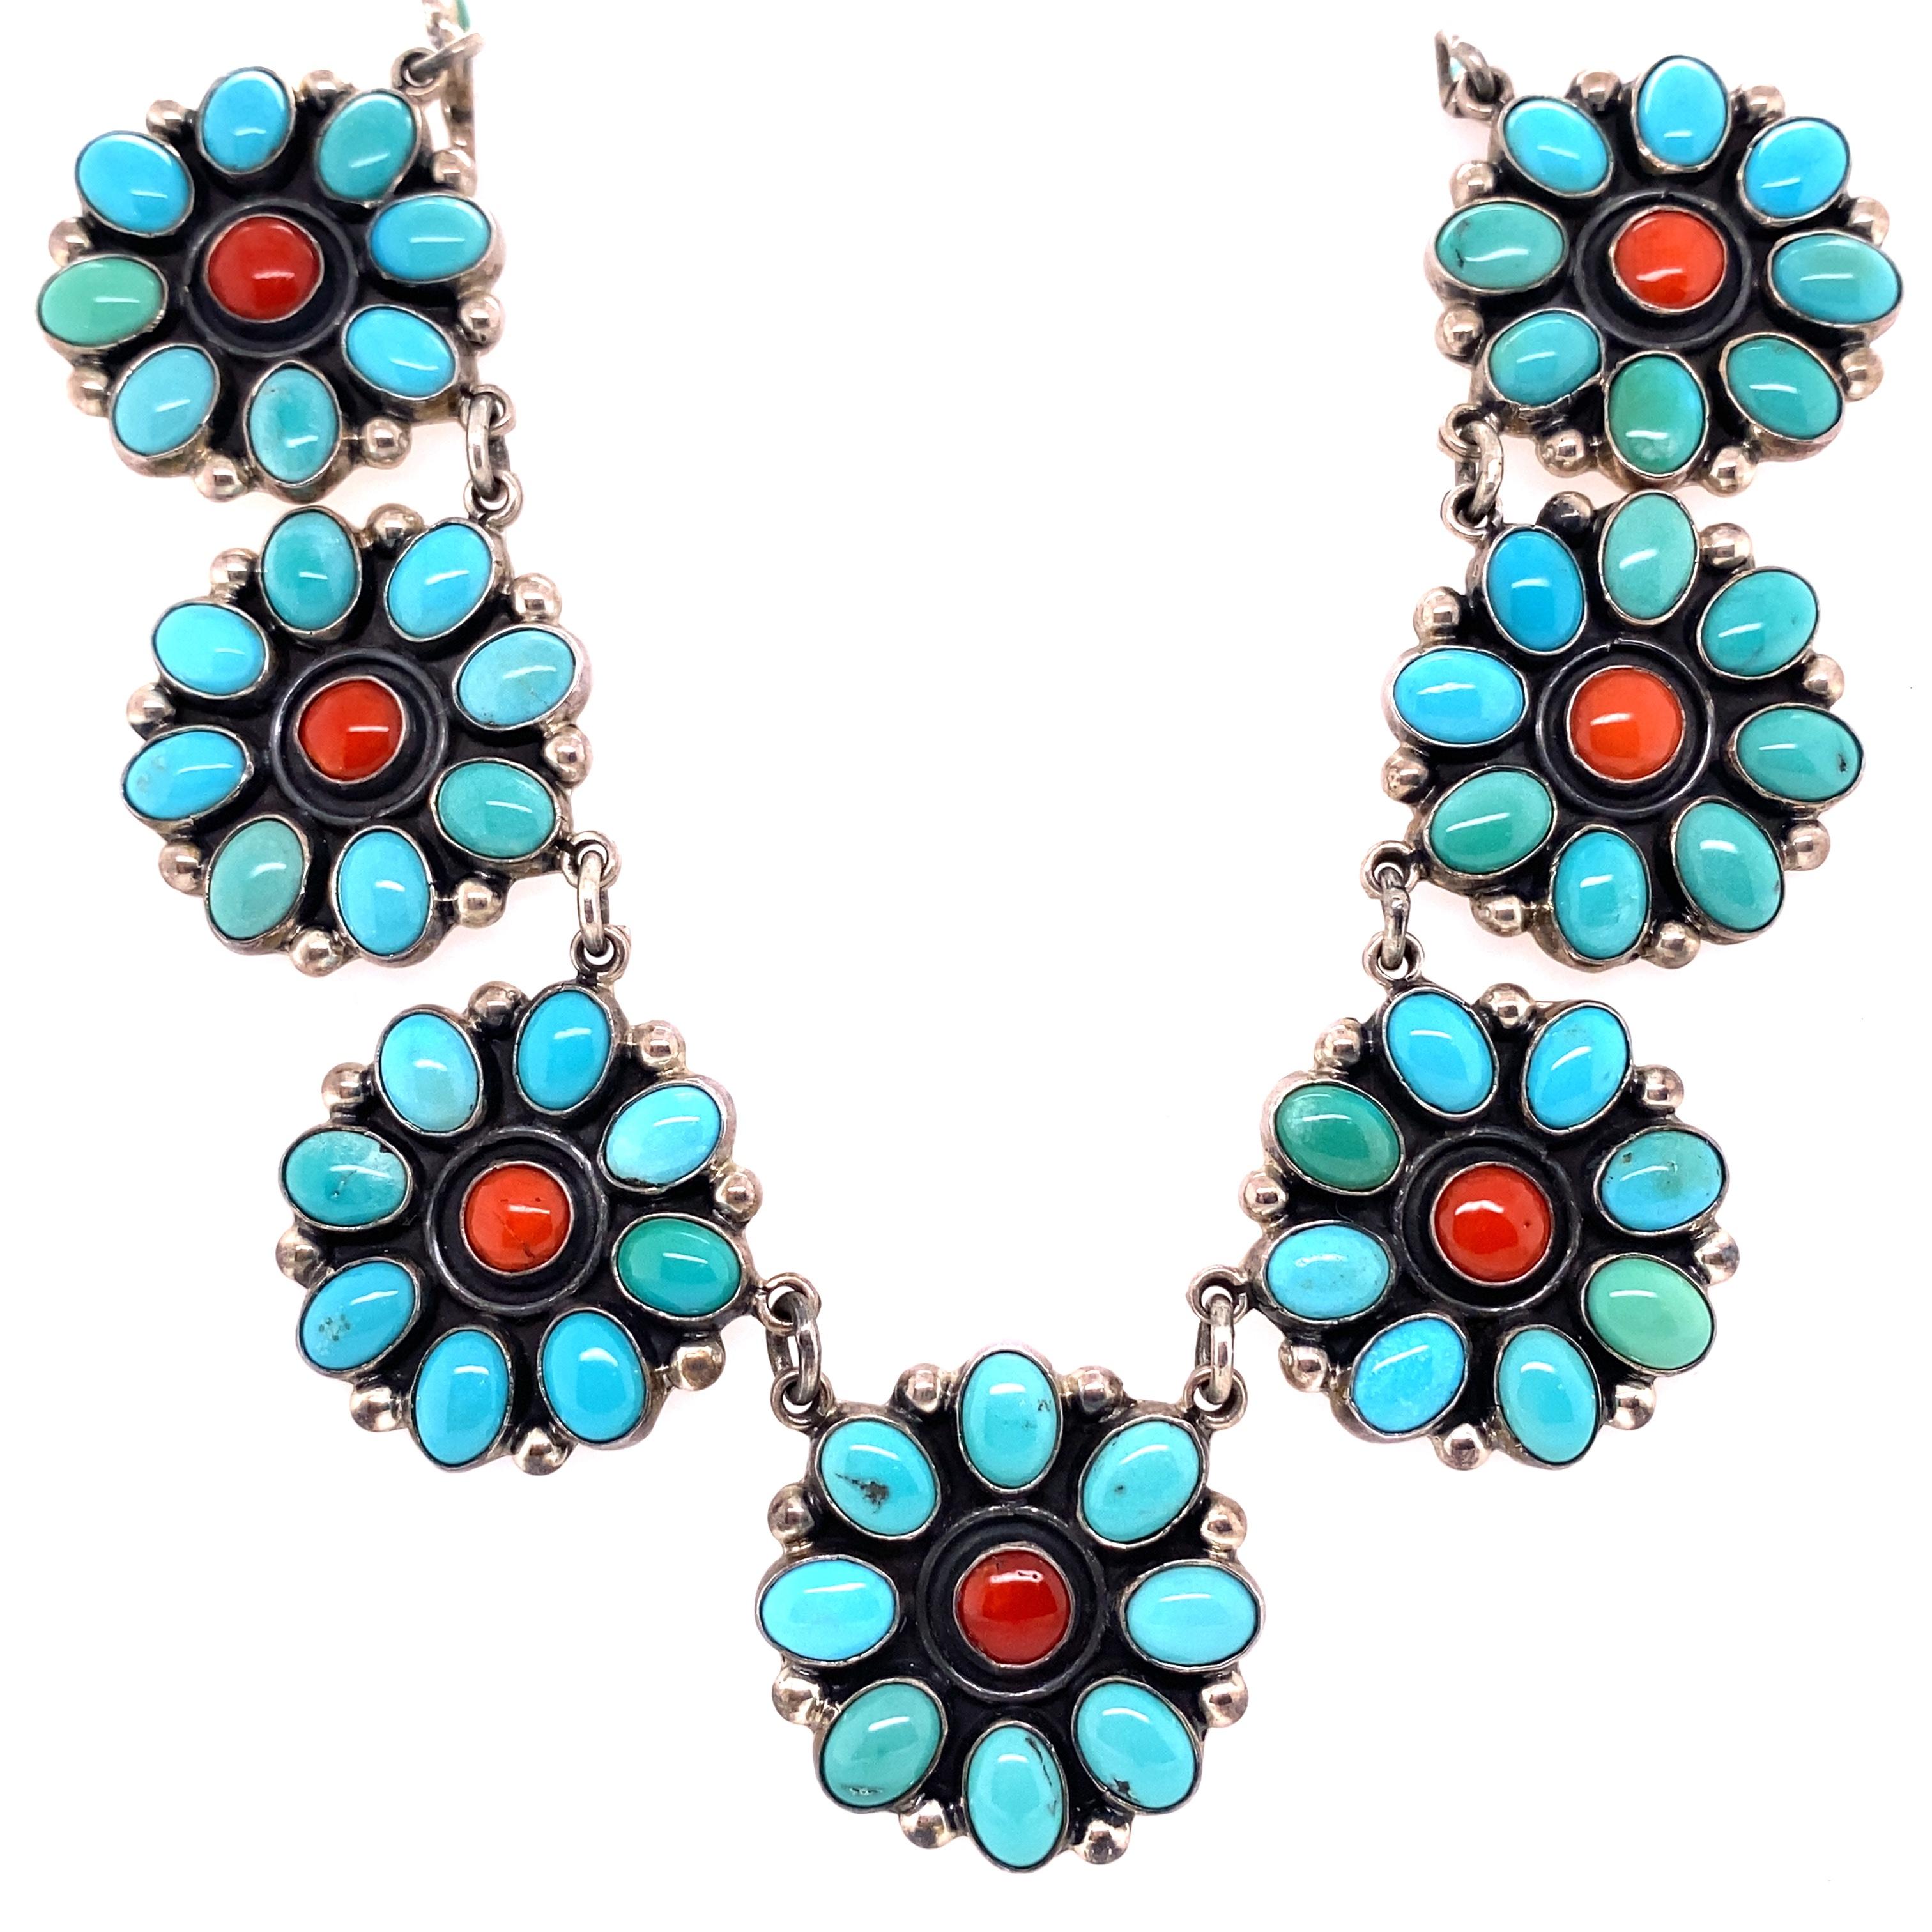 Highly desirable Signed JF Artist: Federico Jimenez Large Native American Navajo Turquoise necklace. Featuring 17 Turquoise with Coral centers Flower designs and matching Earrings, approx. 7/8